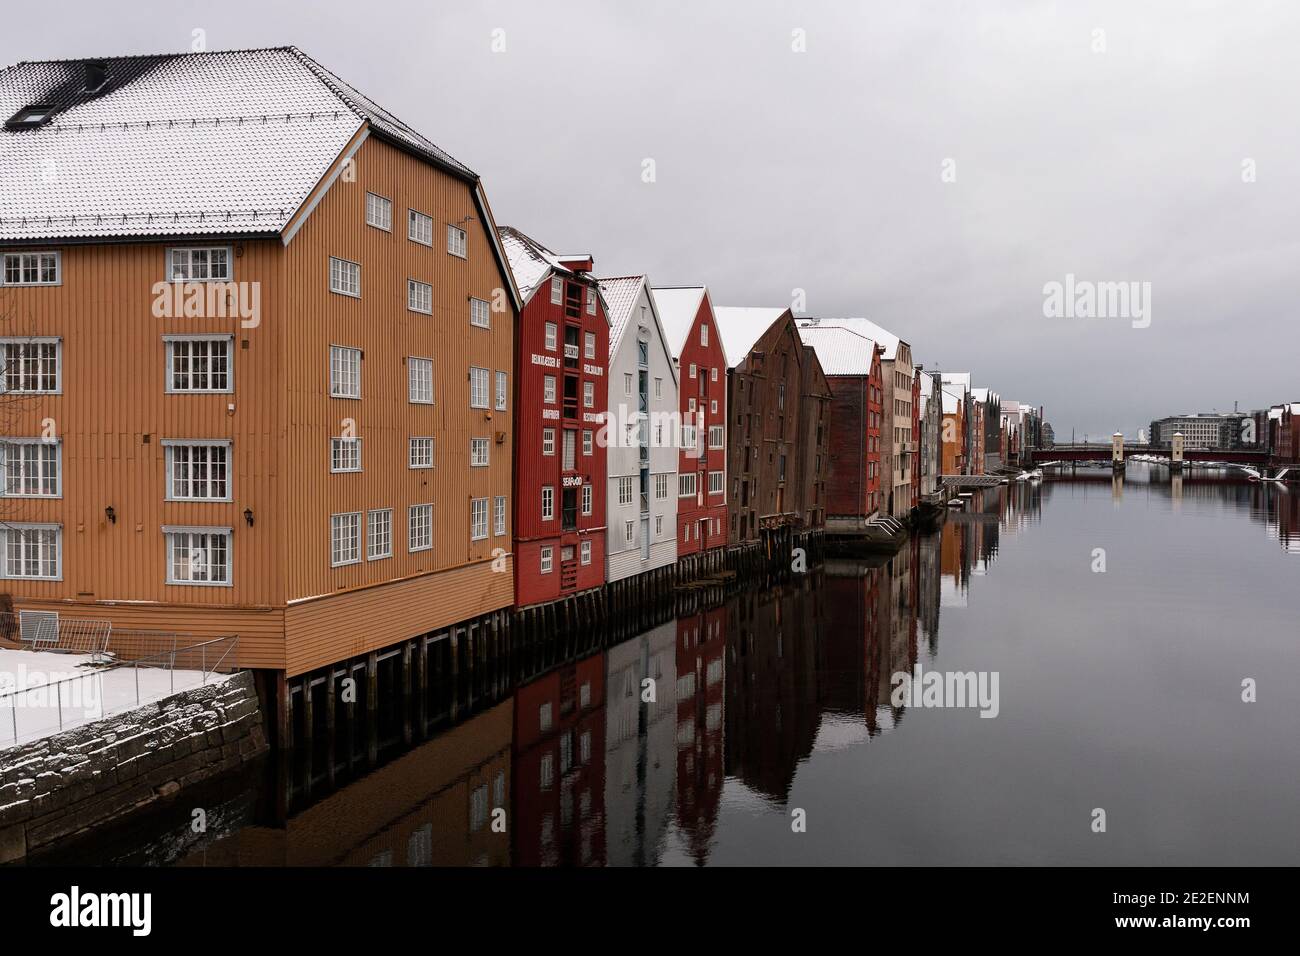 Old wooden warehouses on the Nidelva River,Trondheim, Norway Stock Photo